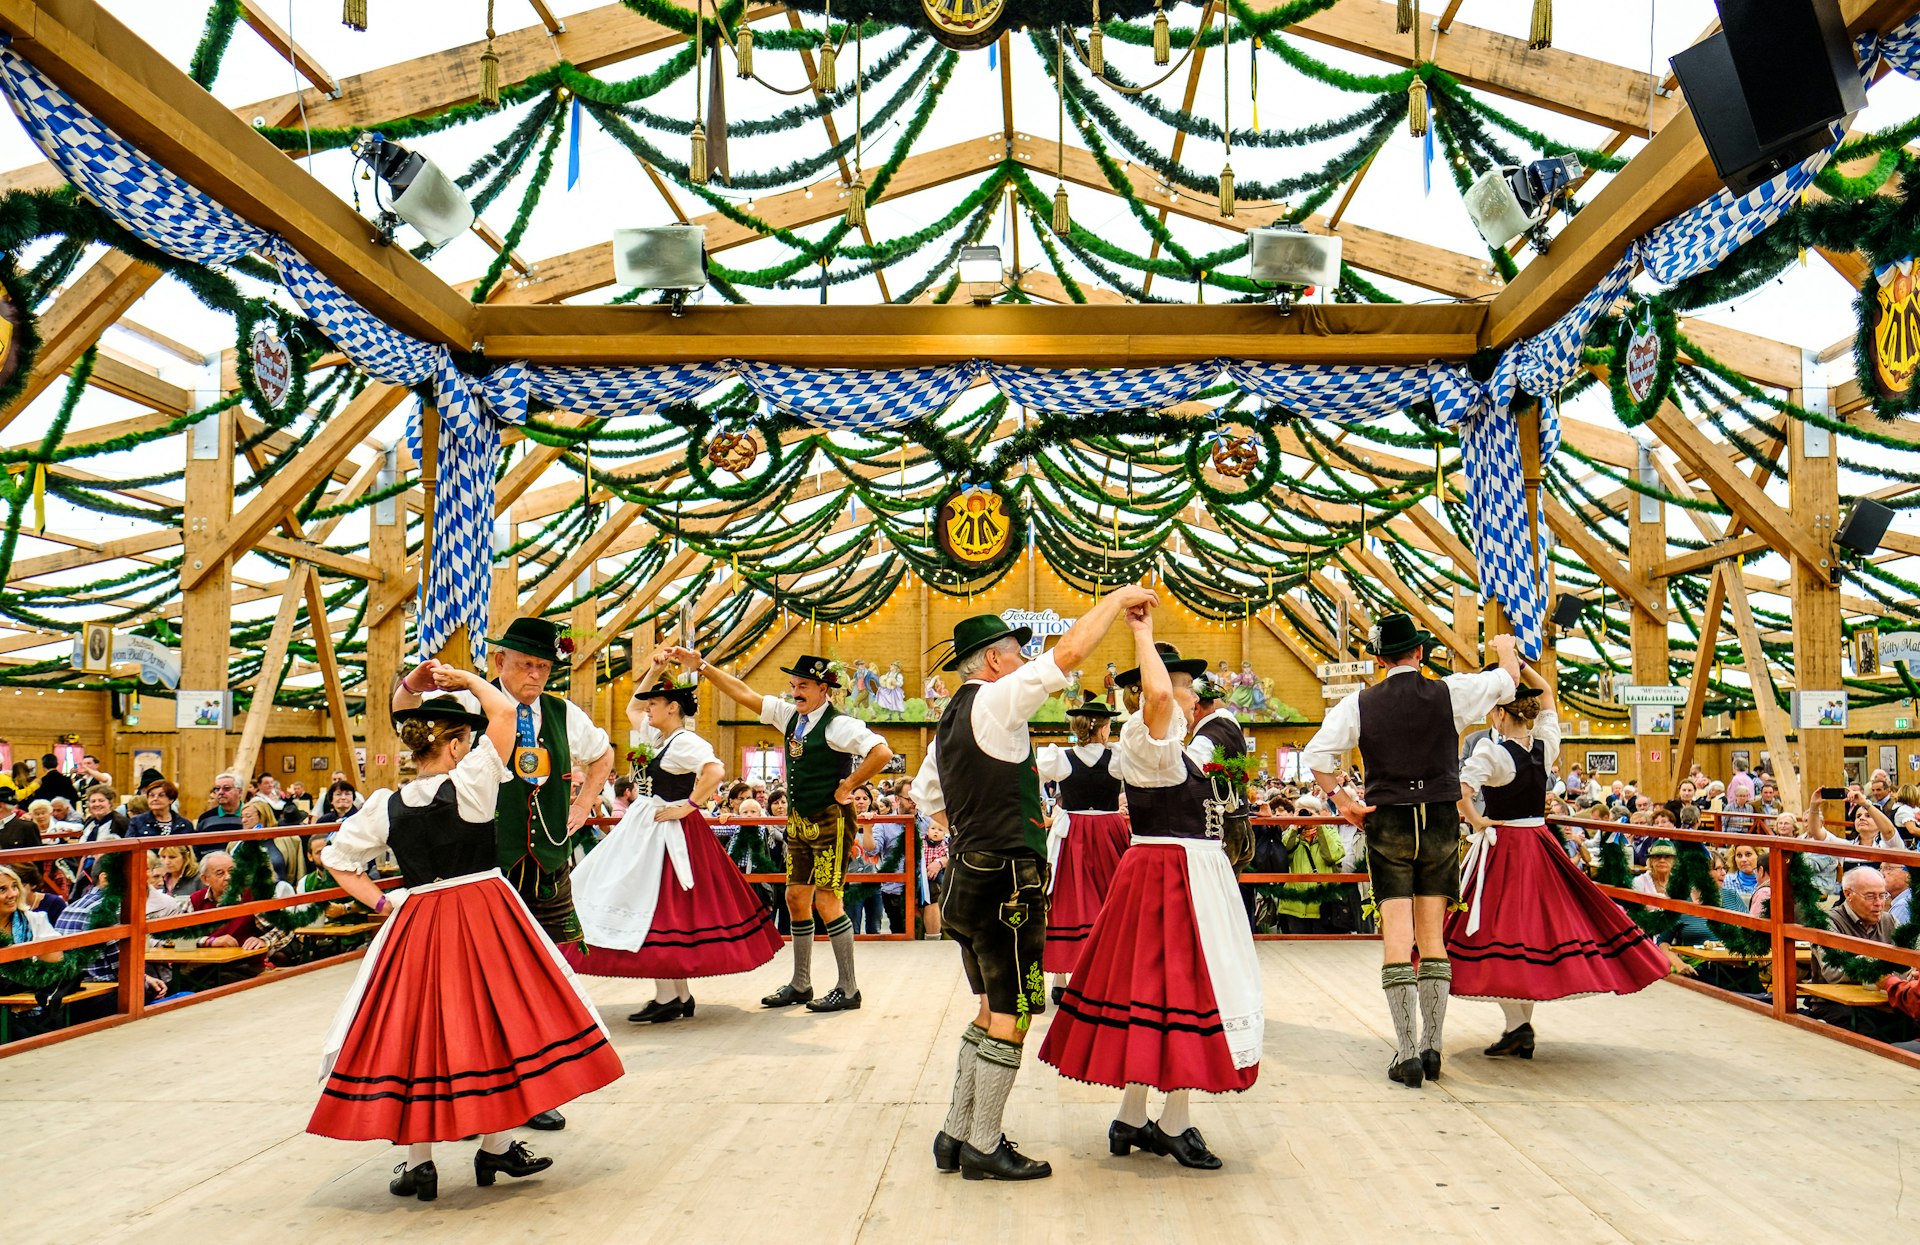 Carrying on the traditional dancing at Oktoberfest